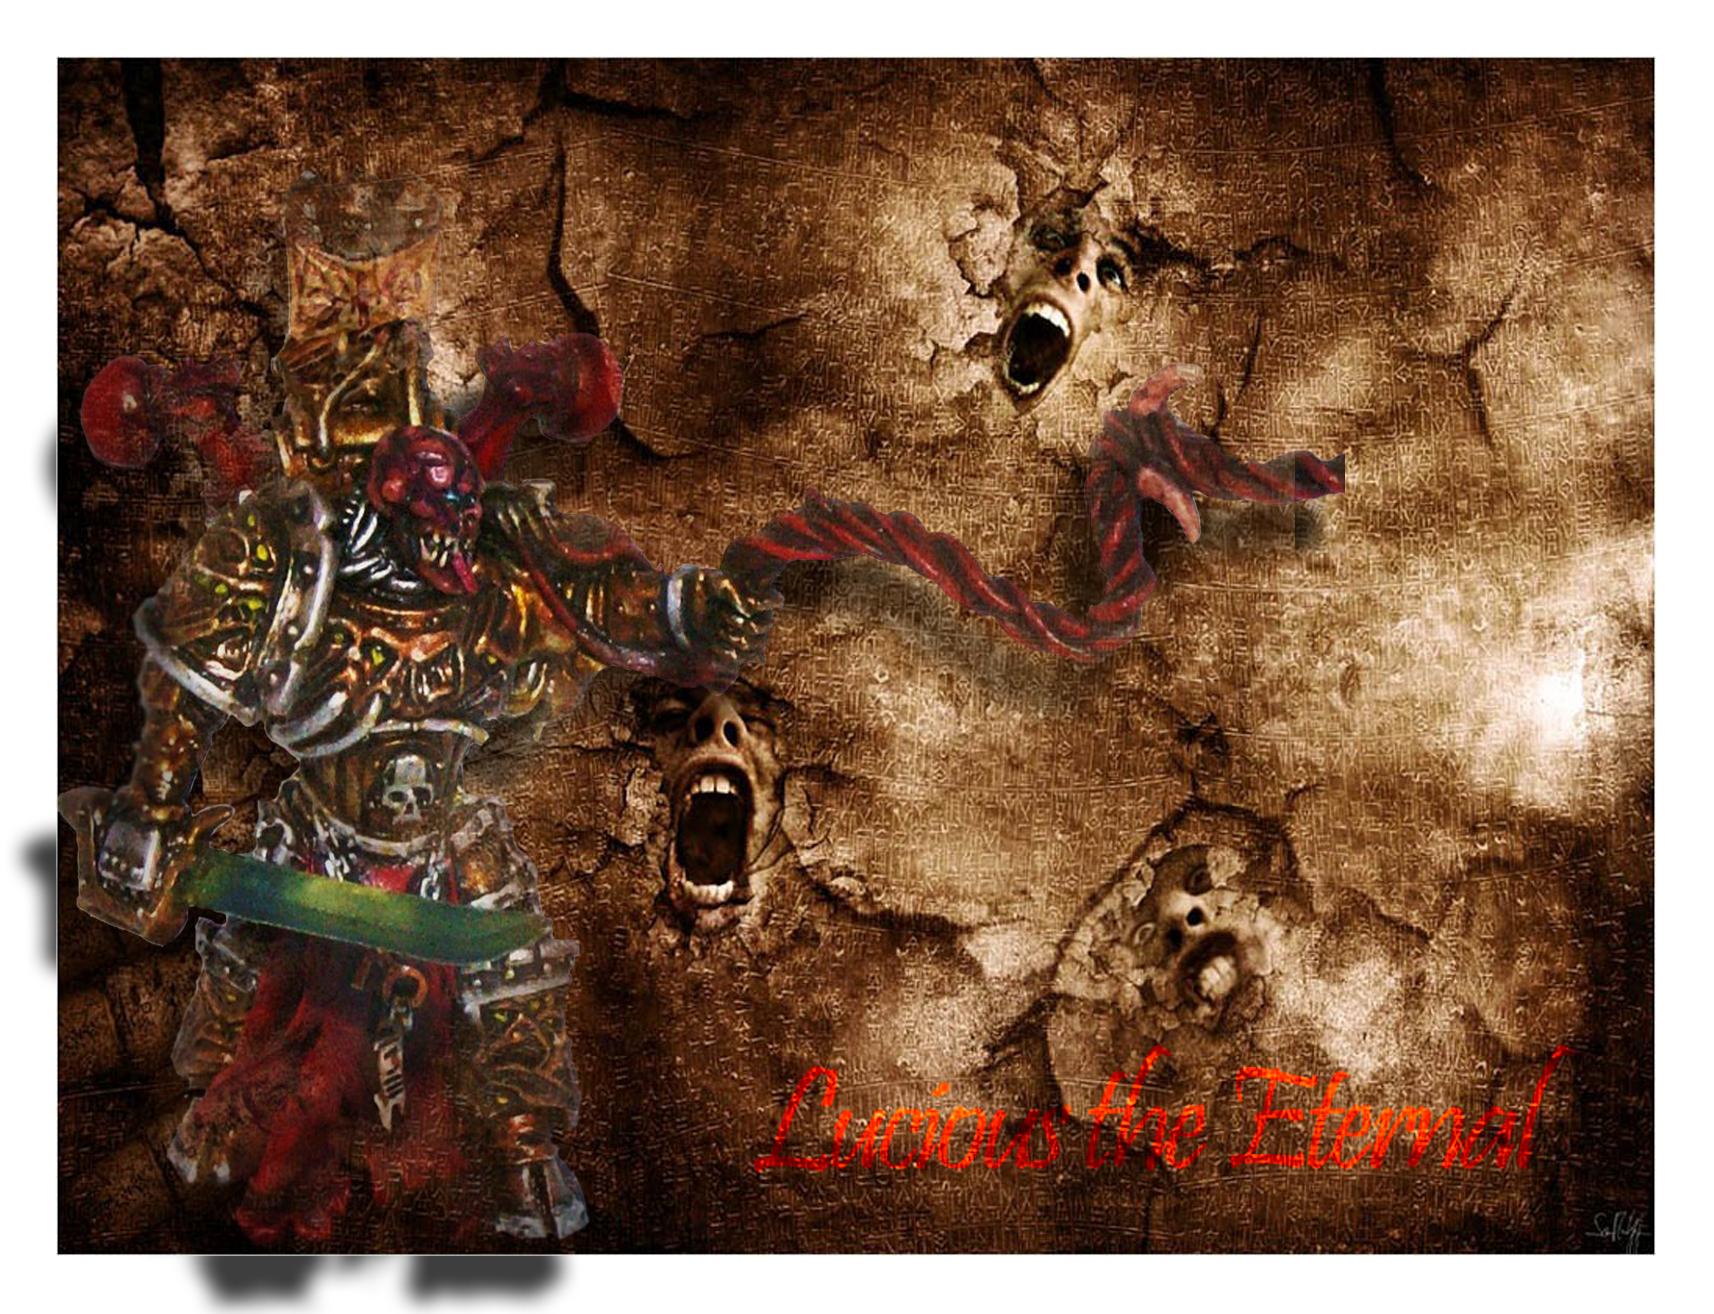 Chaos, Chaos Daemons, Chaos Space Marines, Conversion, Daemons, Khorne, Lucious, Warhammer 40,000